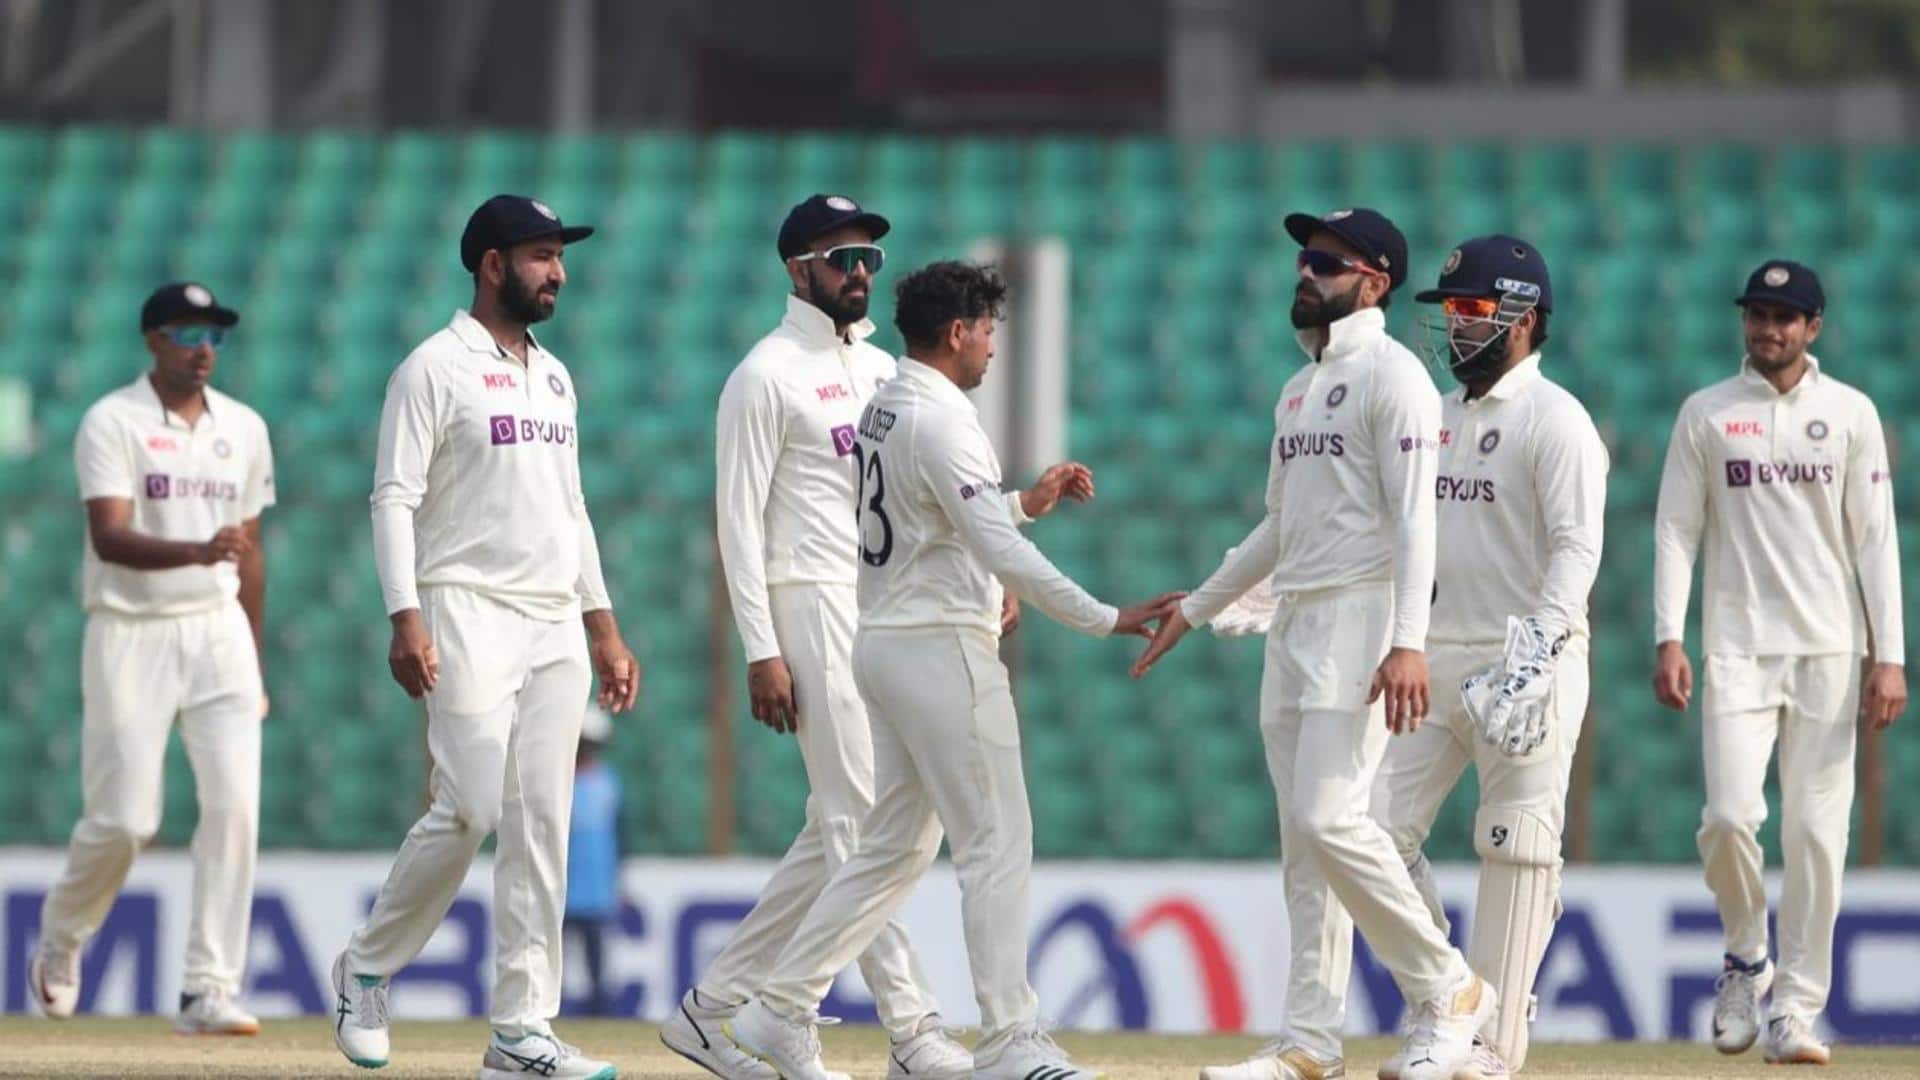 All-round India trounce Bangladesh in first Test: Key stats